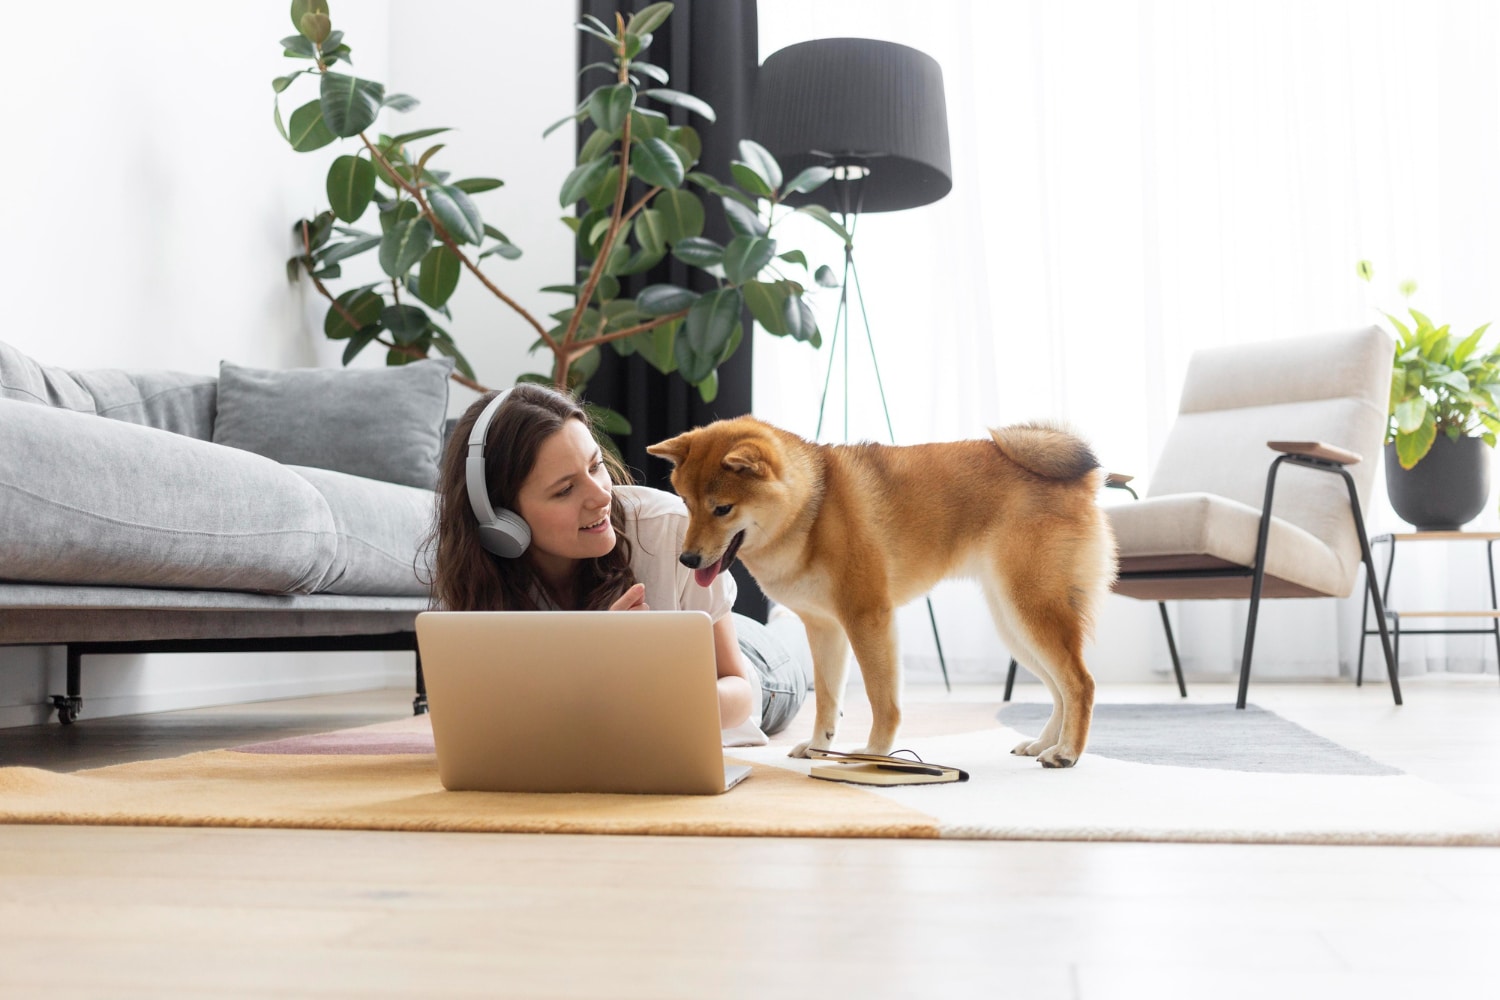 Woman working on laptop with dog standing next to her and watching